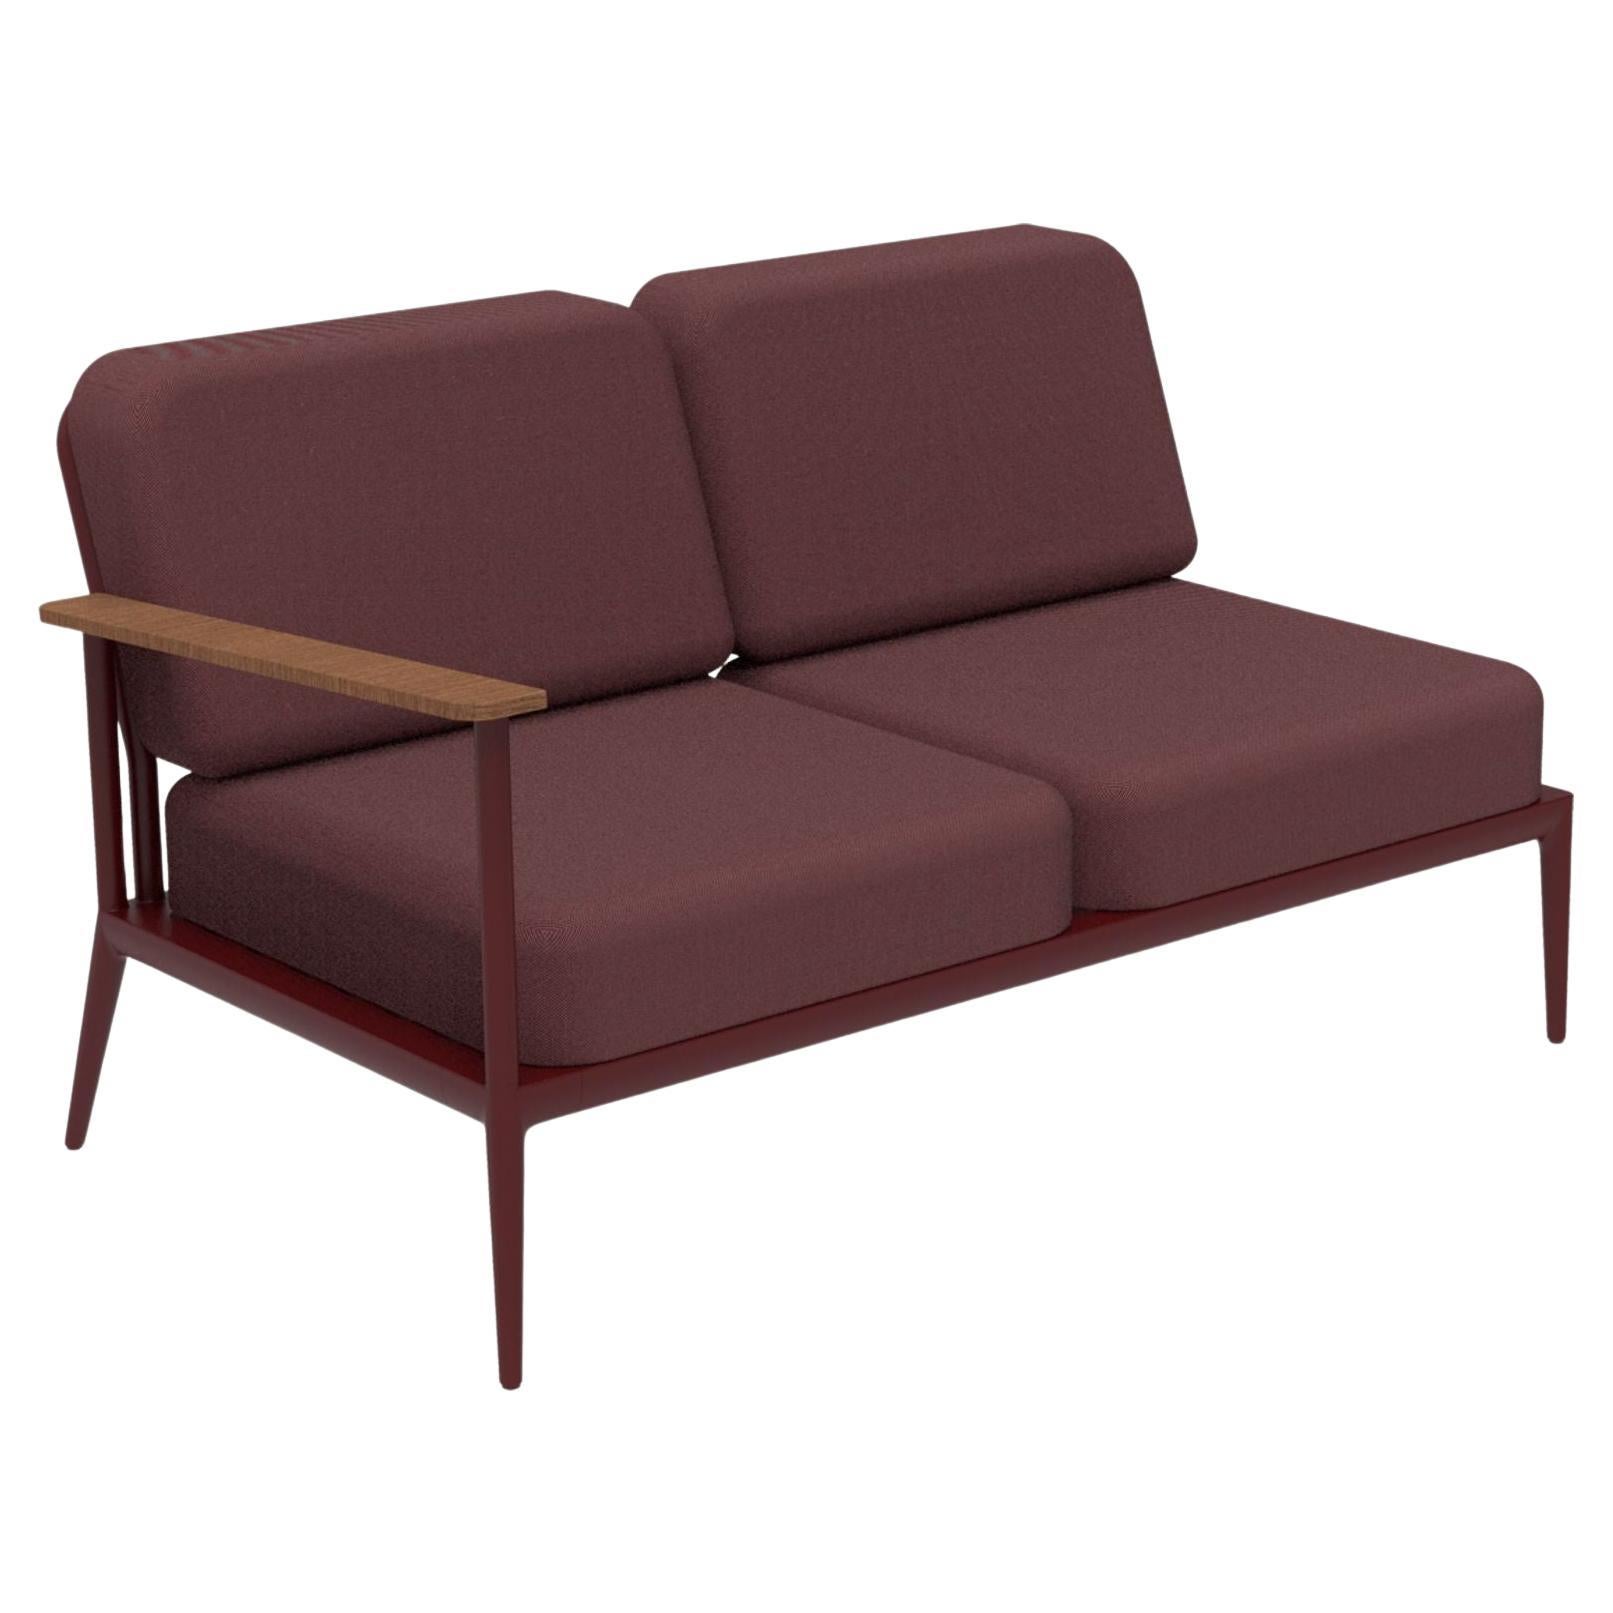 Nature Burgundy Double Right Modular Sofa by Mowee